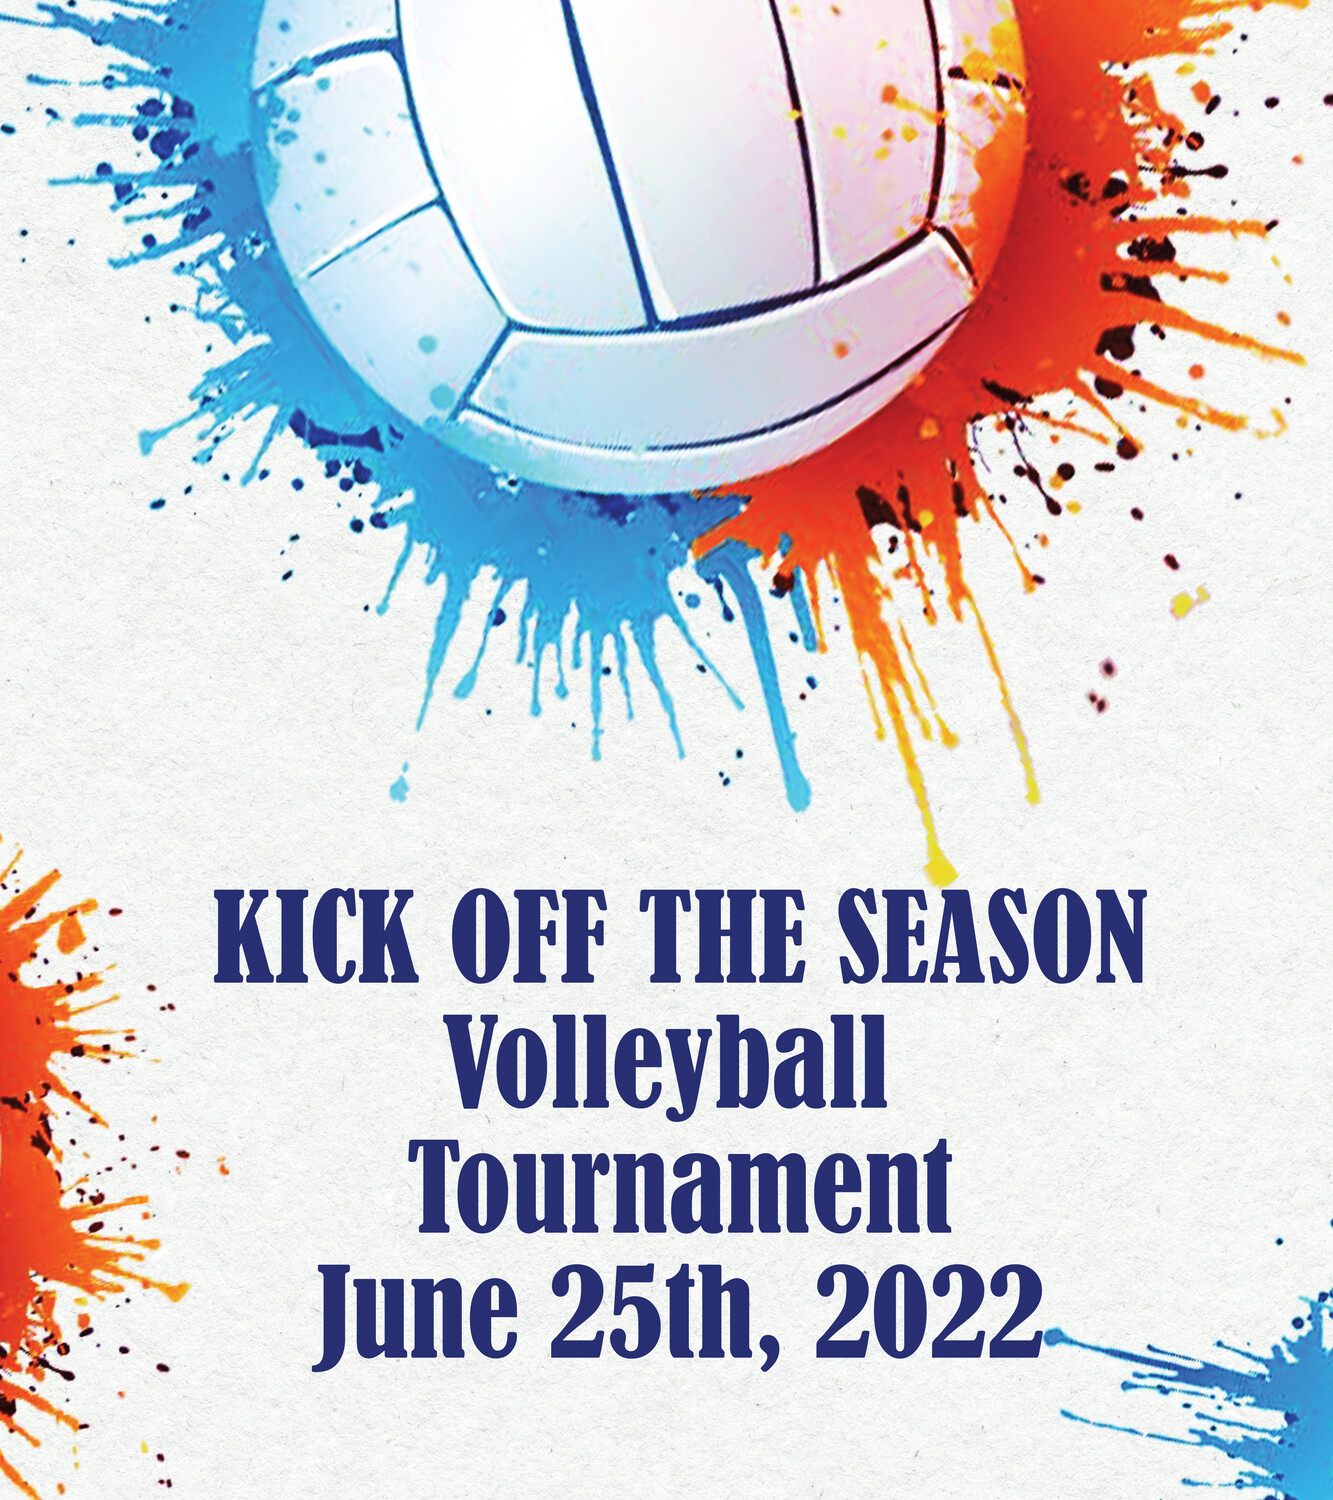 Kick Off the Summer Tournament - Soliday's June 25th, 2022